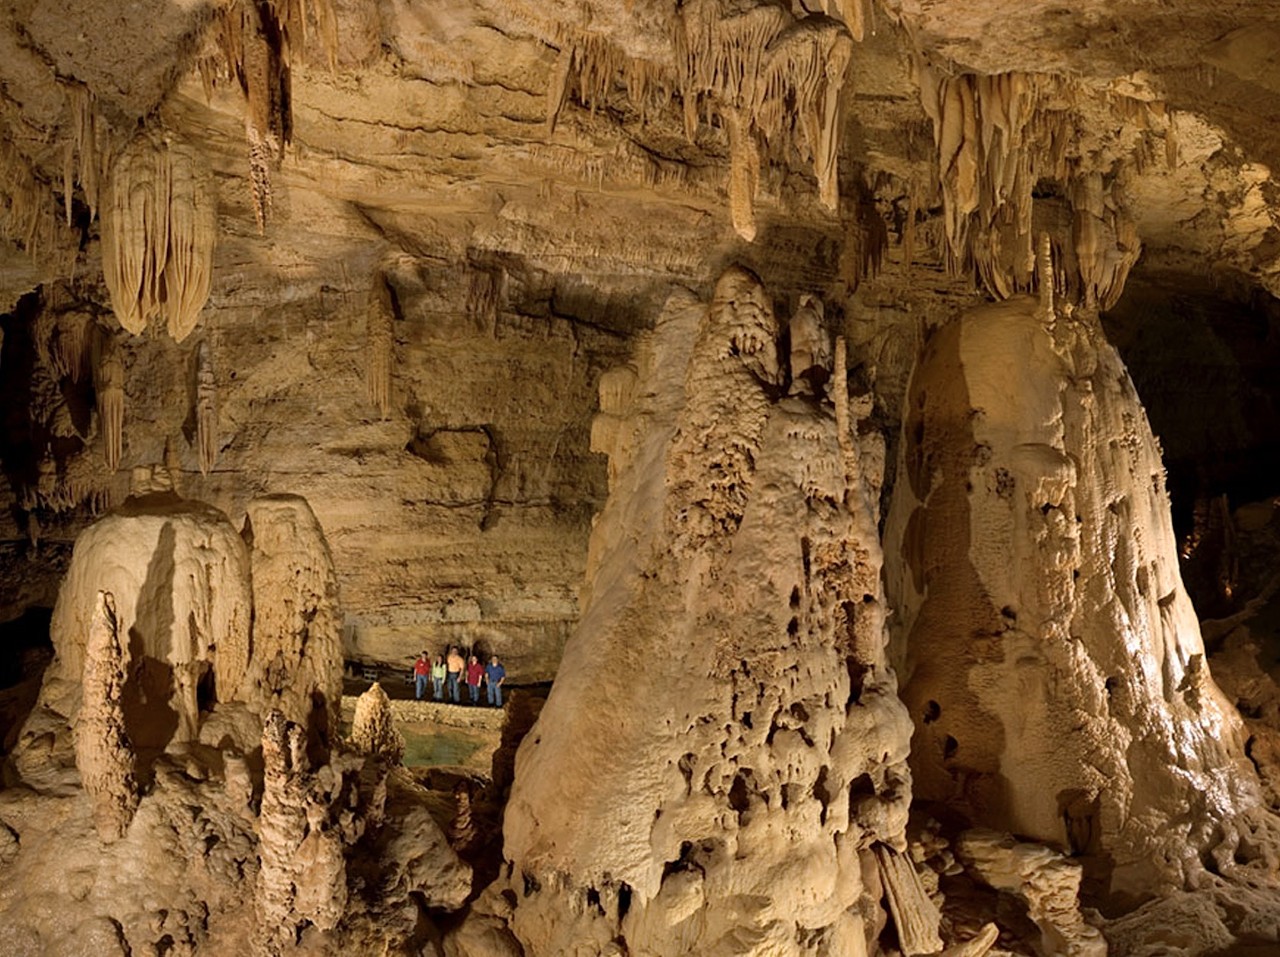 
Go underground and enjoy a Texas cave
What better way to duck the oppressive heat than exploring the cool, damp environs of one of the state’s many breathtaking caves, some of which are pretty darned close to San Antonio. Check out our list of 15 Texas caves worth a road trip from San Antonio .